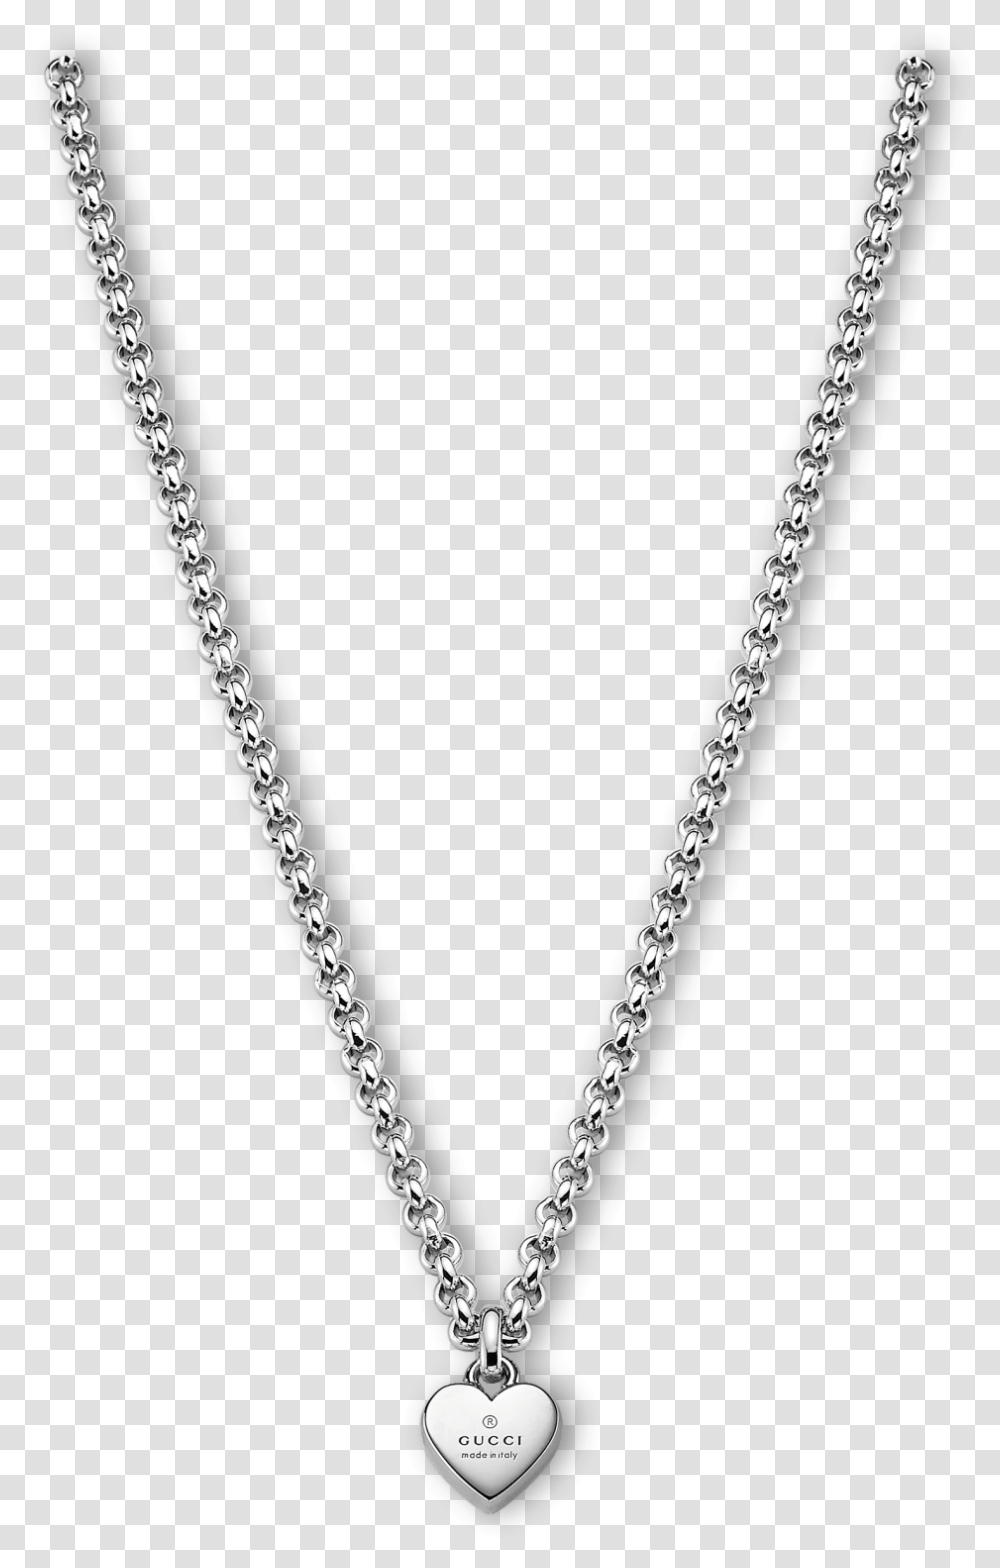 Gucci Necklace Gucci Necklace Background, Jewelry, Accessories, Accessory, Chain Transparent Png